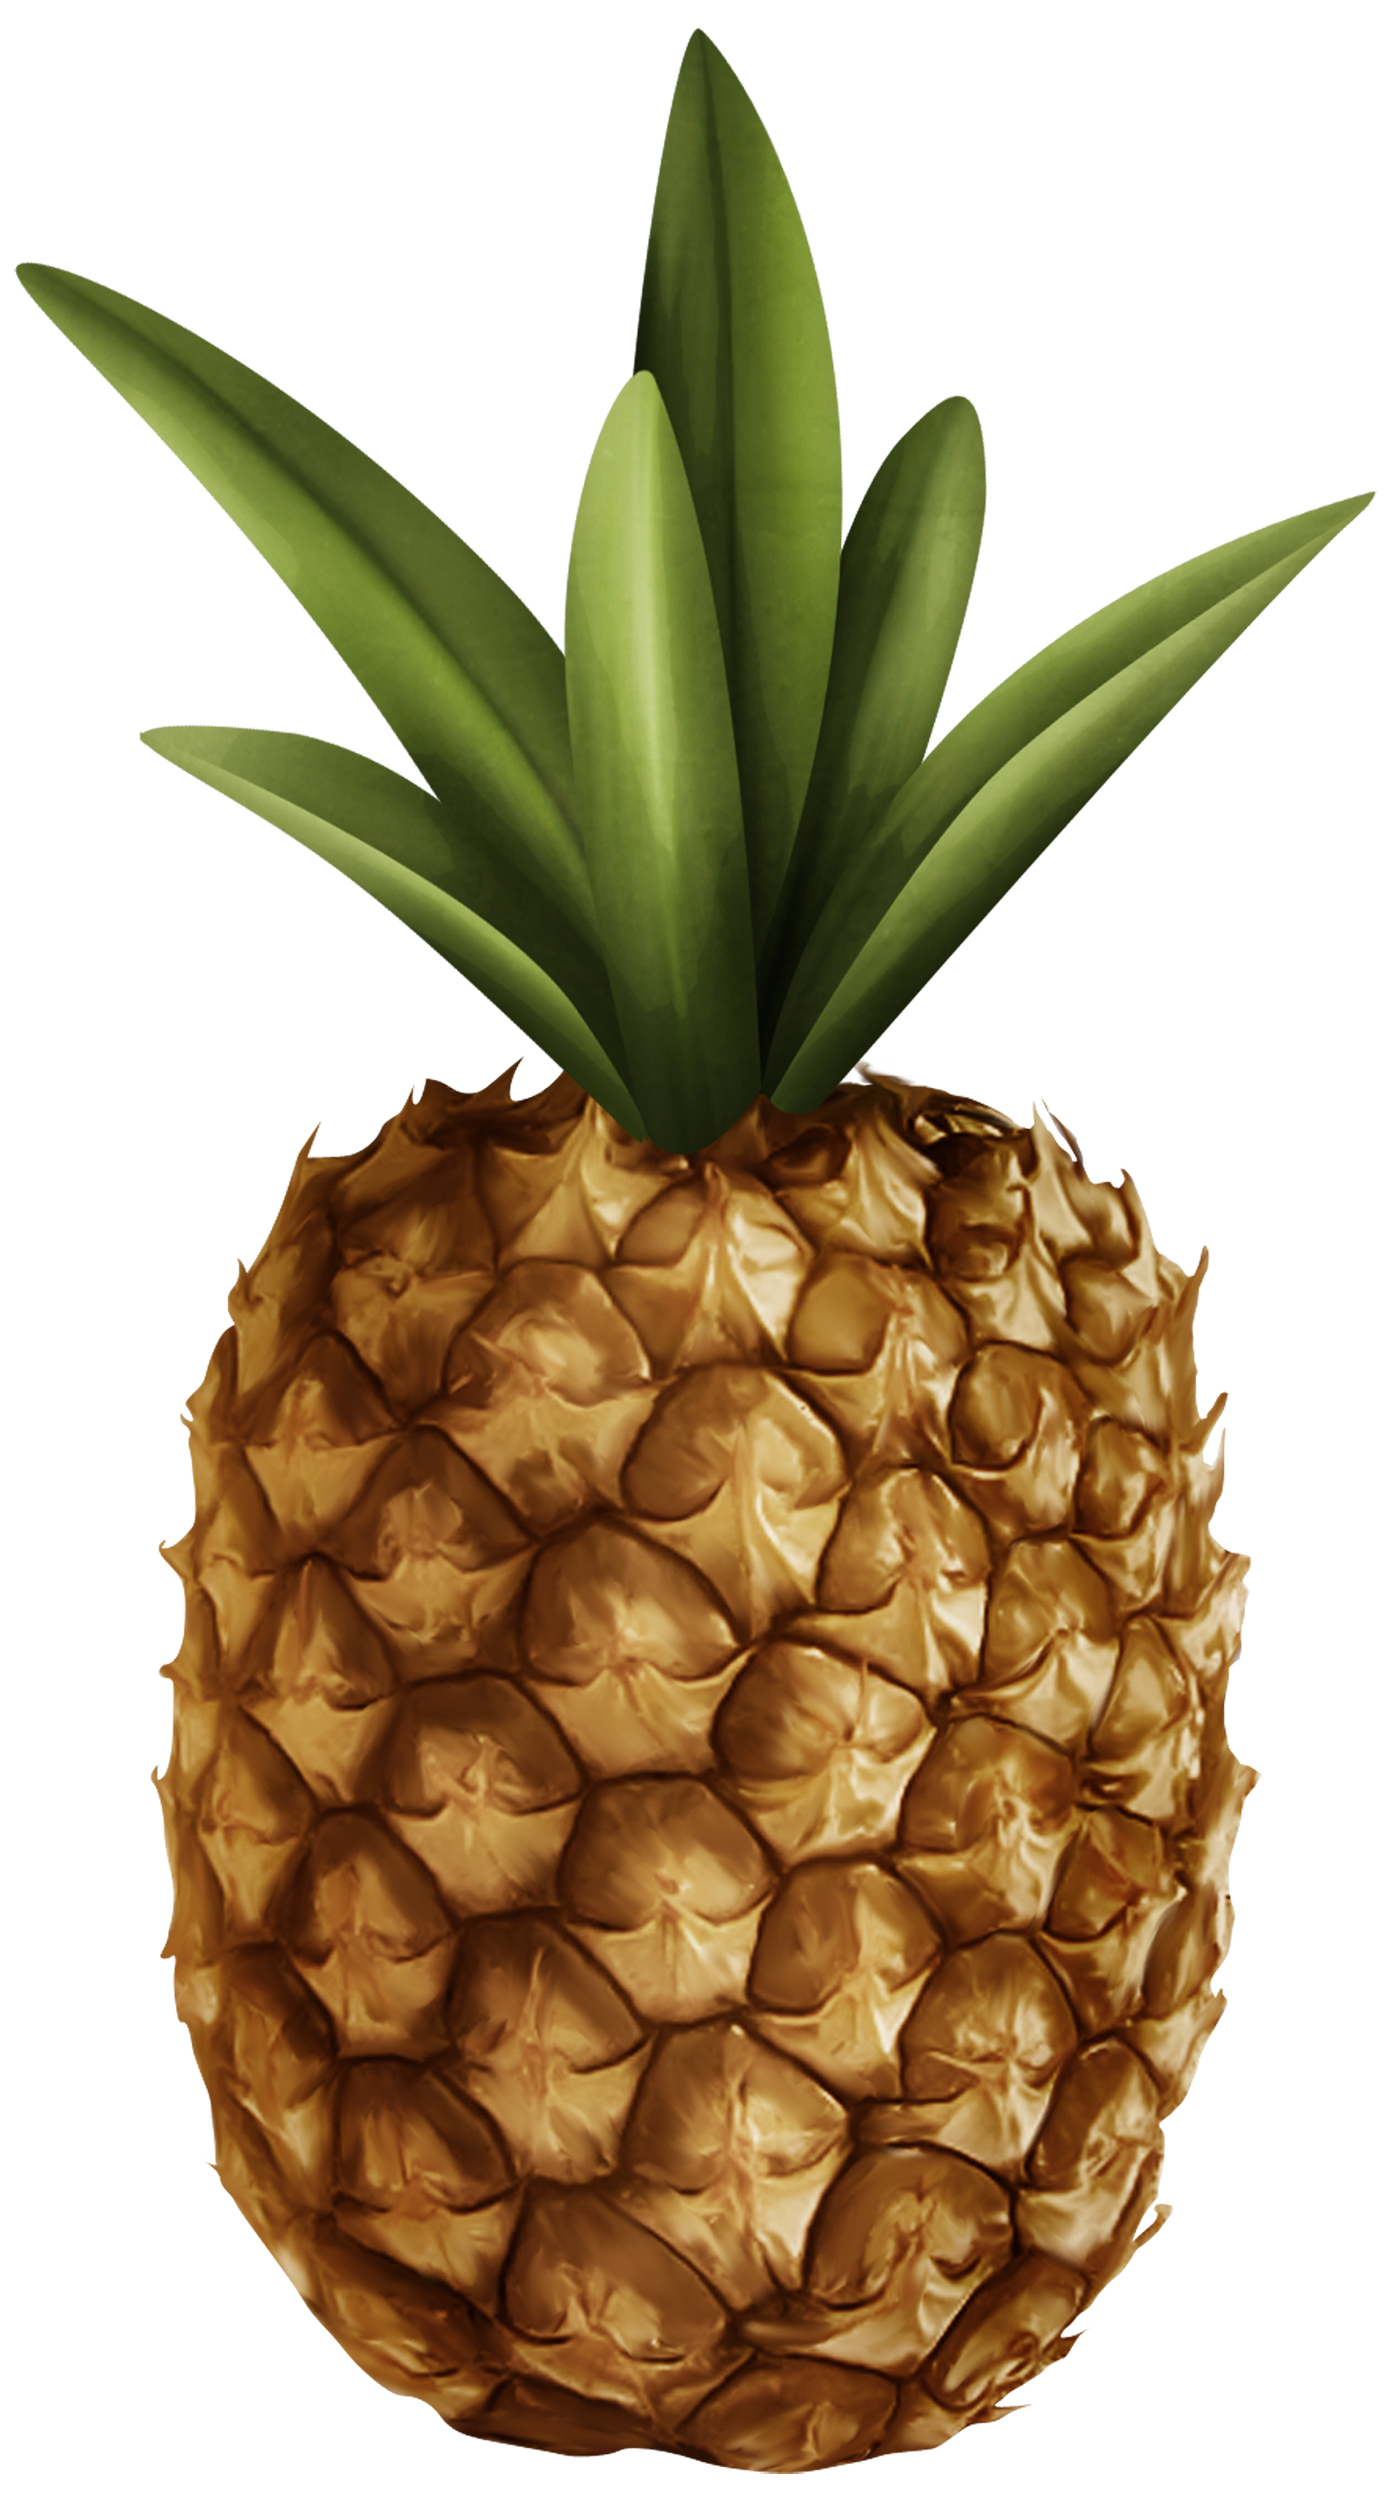 Pineapple Clipart - 47 cliparts